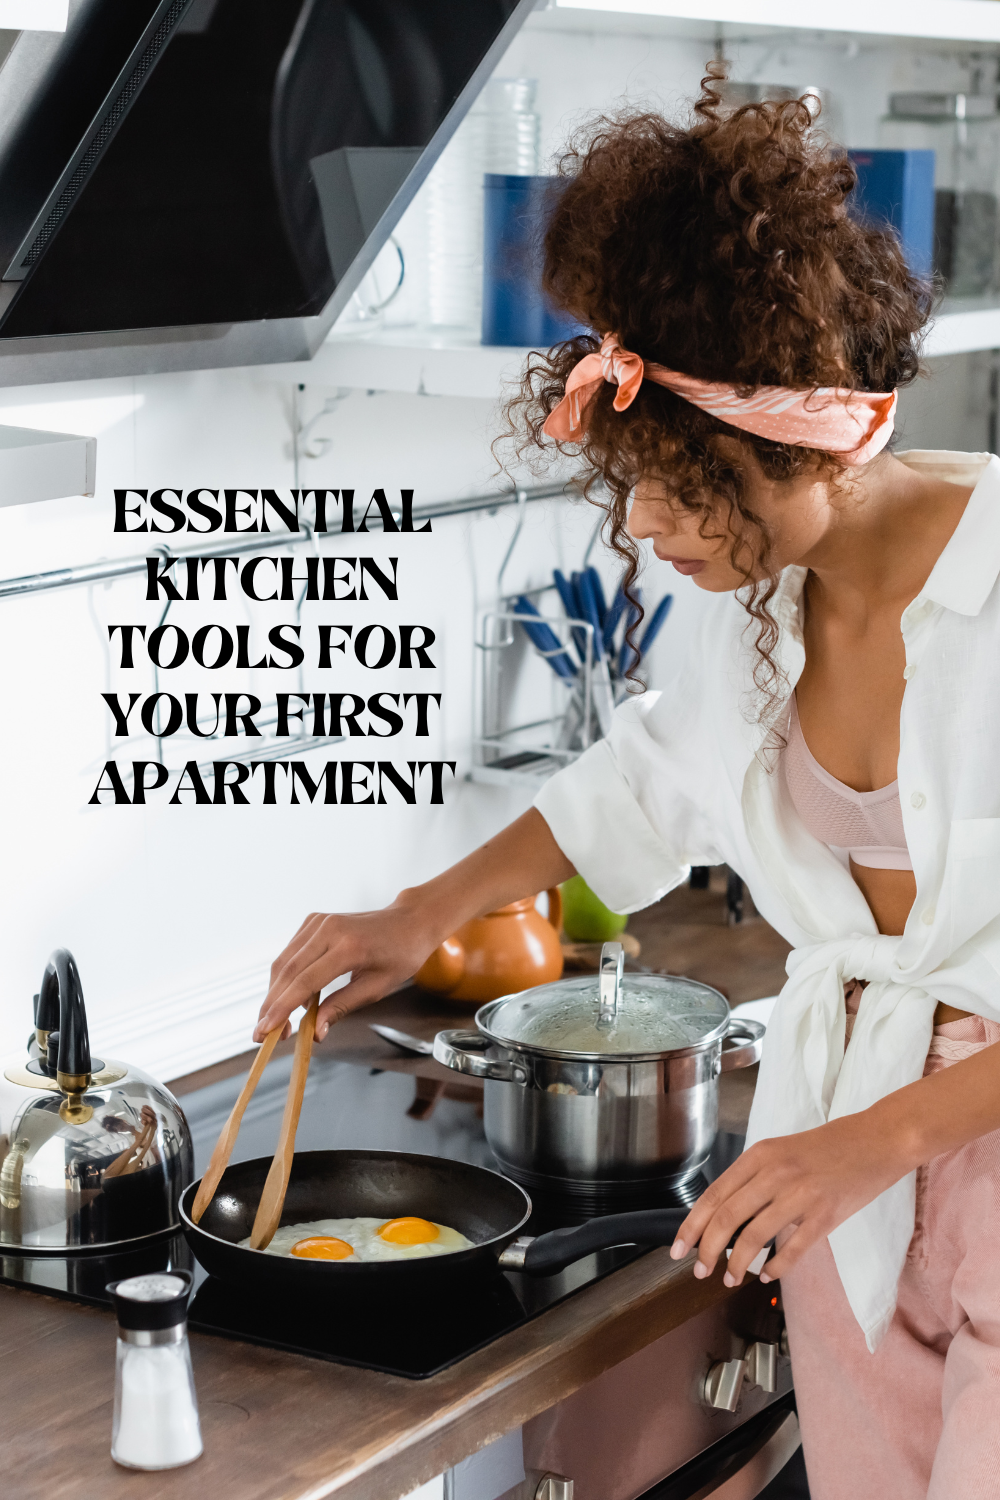 4 Essential Kitchen Appliances For Your First Apartment